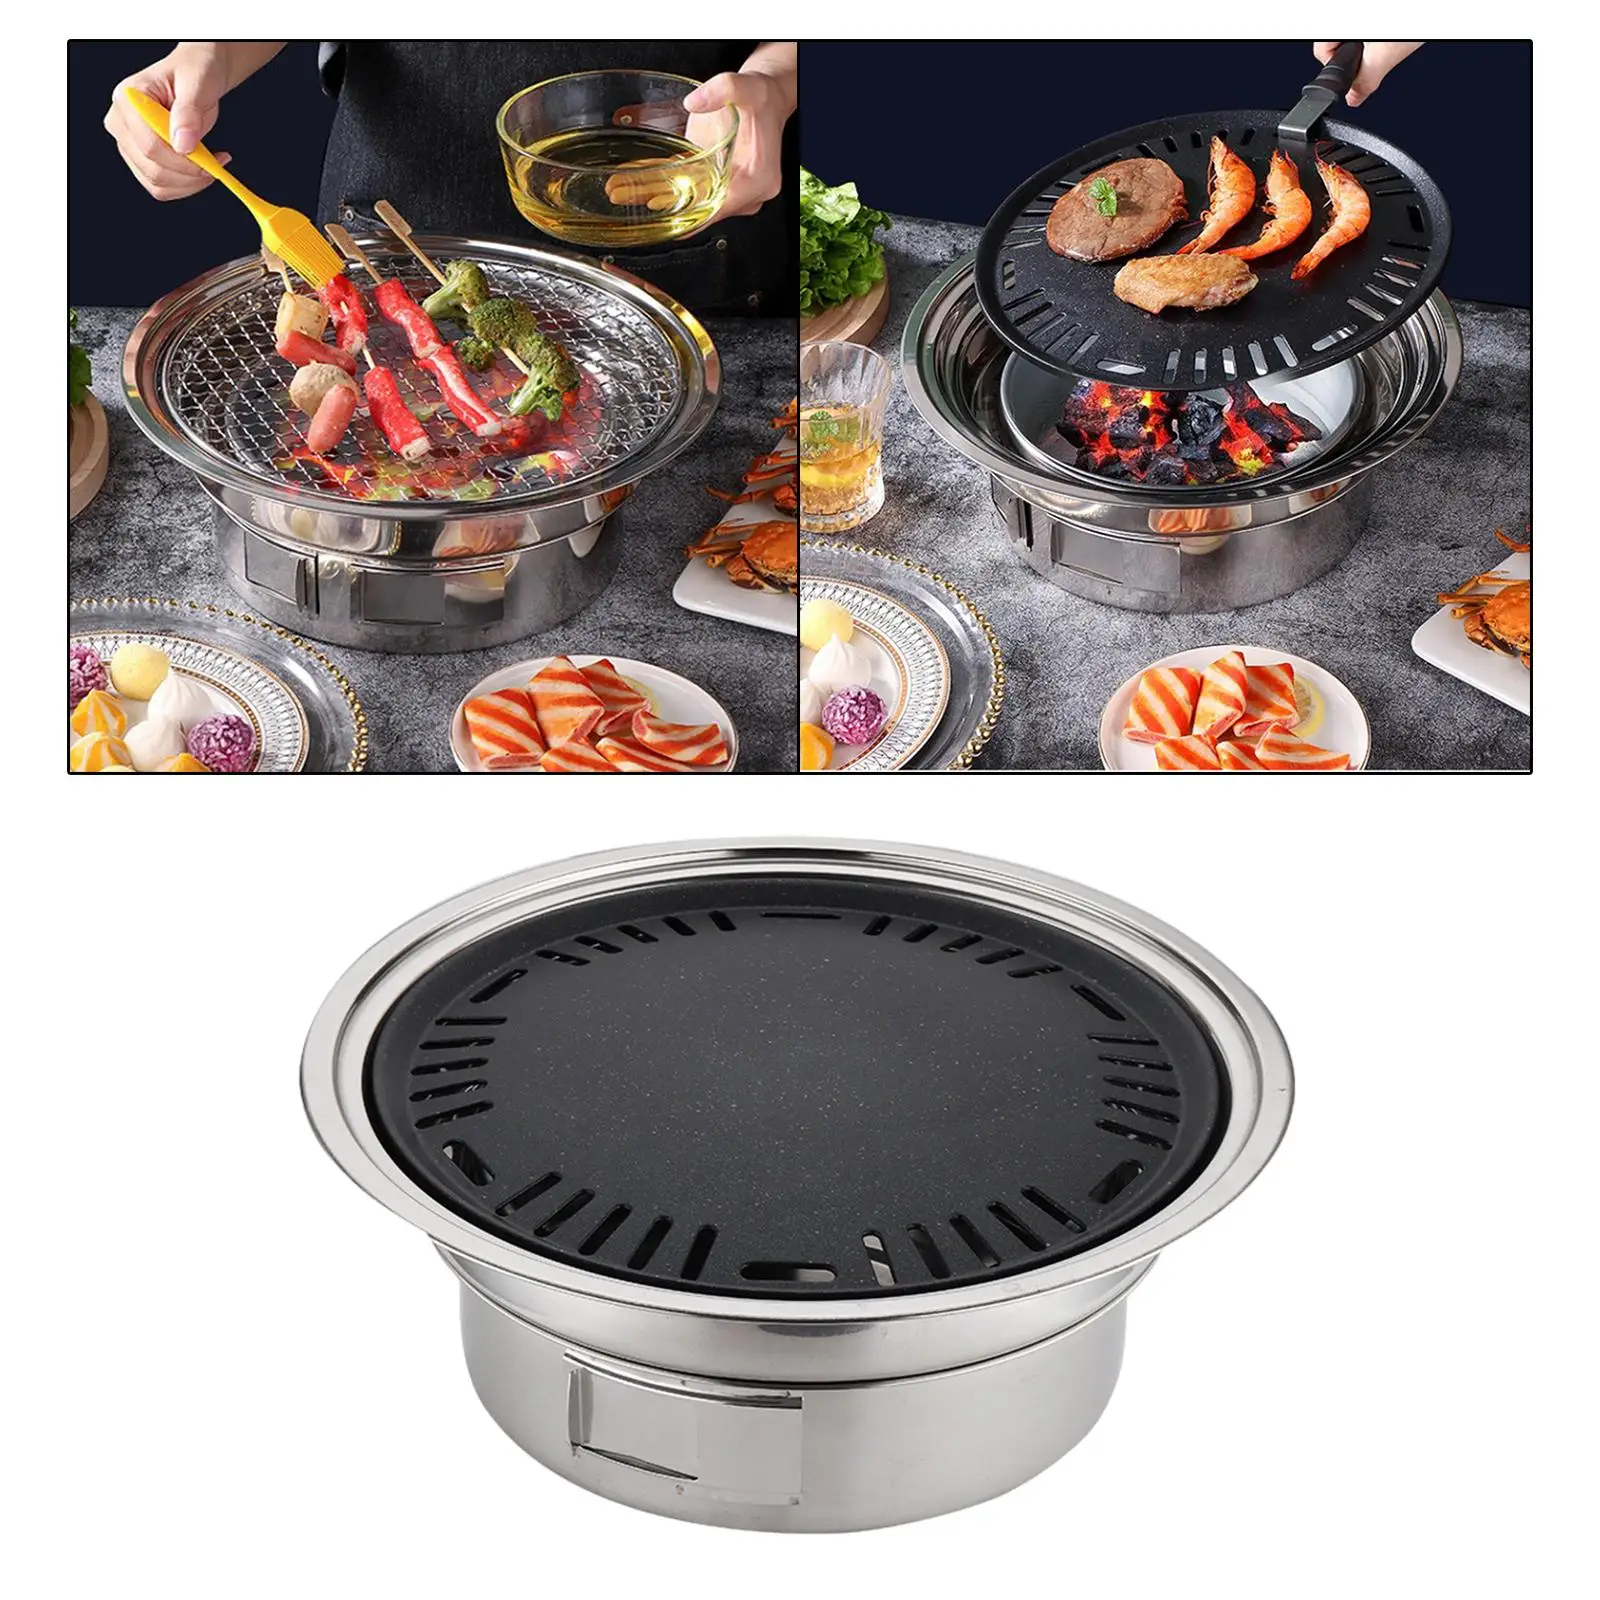 Korean Charcoal Barbecue Grill Smokeless Roaster Rack Charcoal Pan Non-Stick for Traveling Camping Grilling Fish Shrimp